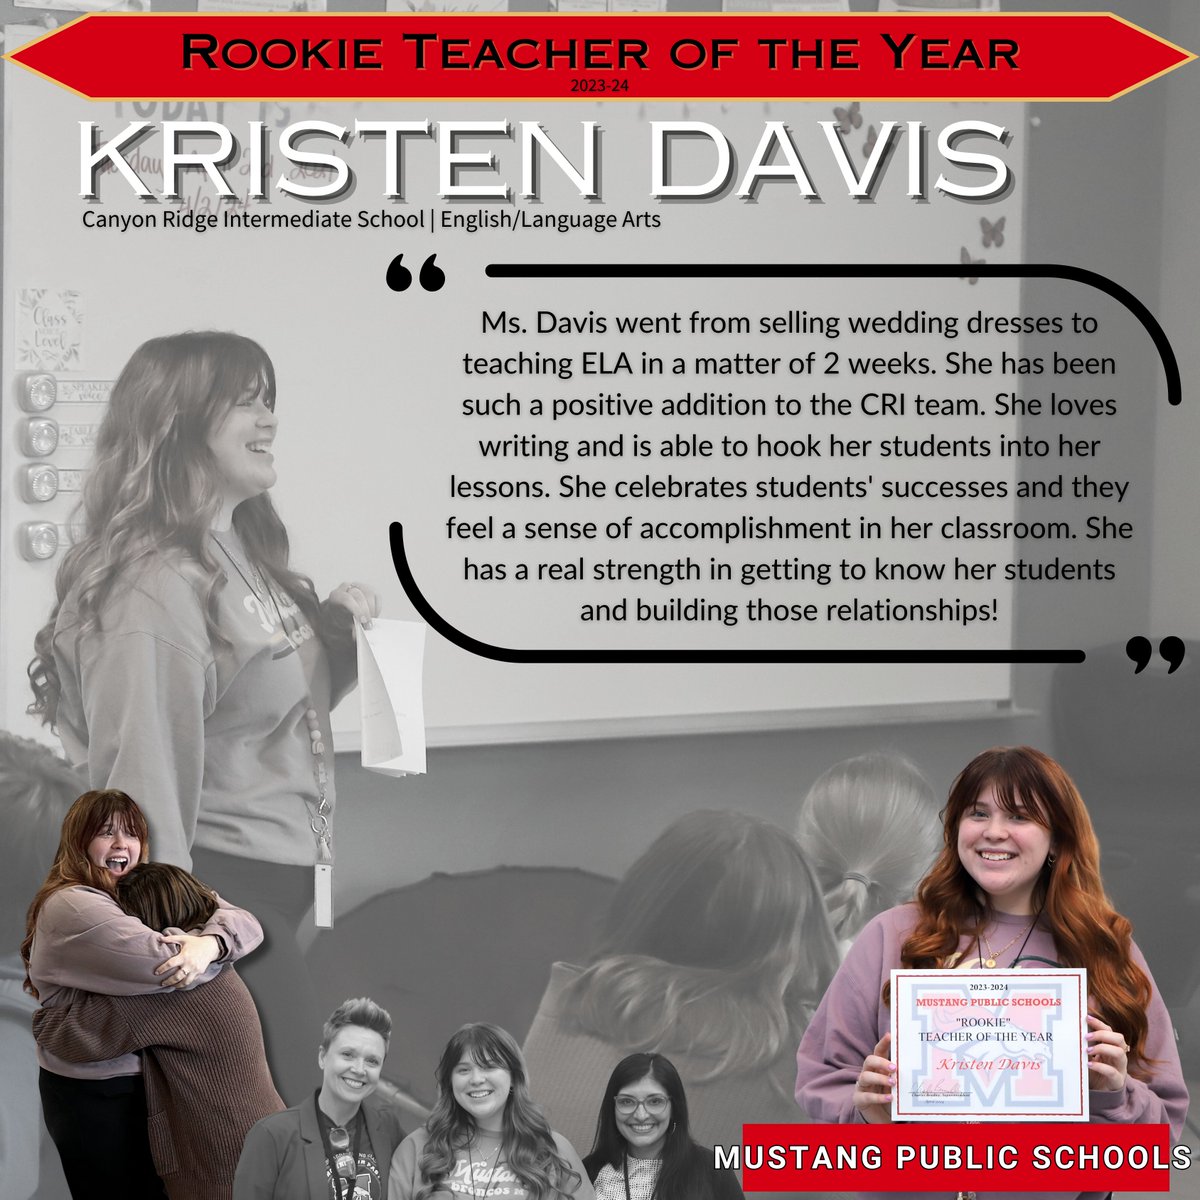 Meet one of our three Rookie Teachers of the Year: Kristen Davis from Canyon Ridge Intermediate!🍎 With a passion for ELA, she's created a vibrant learning environment where every student feels valued & inspired. Congrats on your amazing start! #BroncoPride #StaffSpotlight